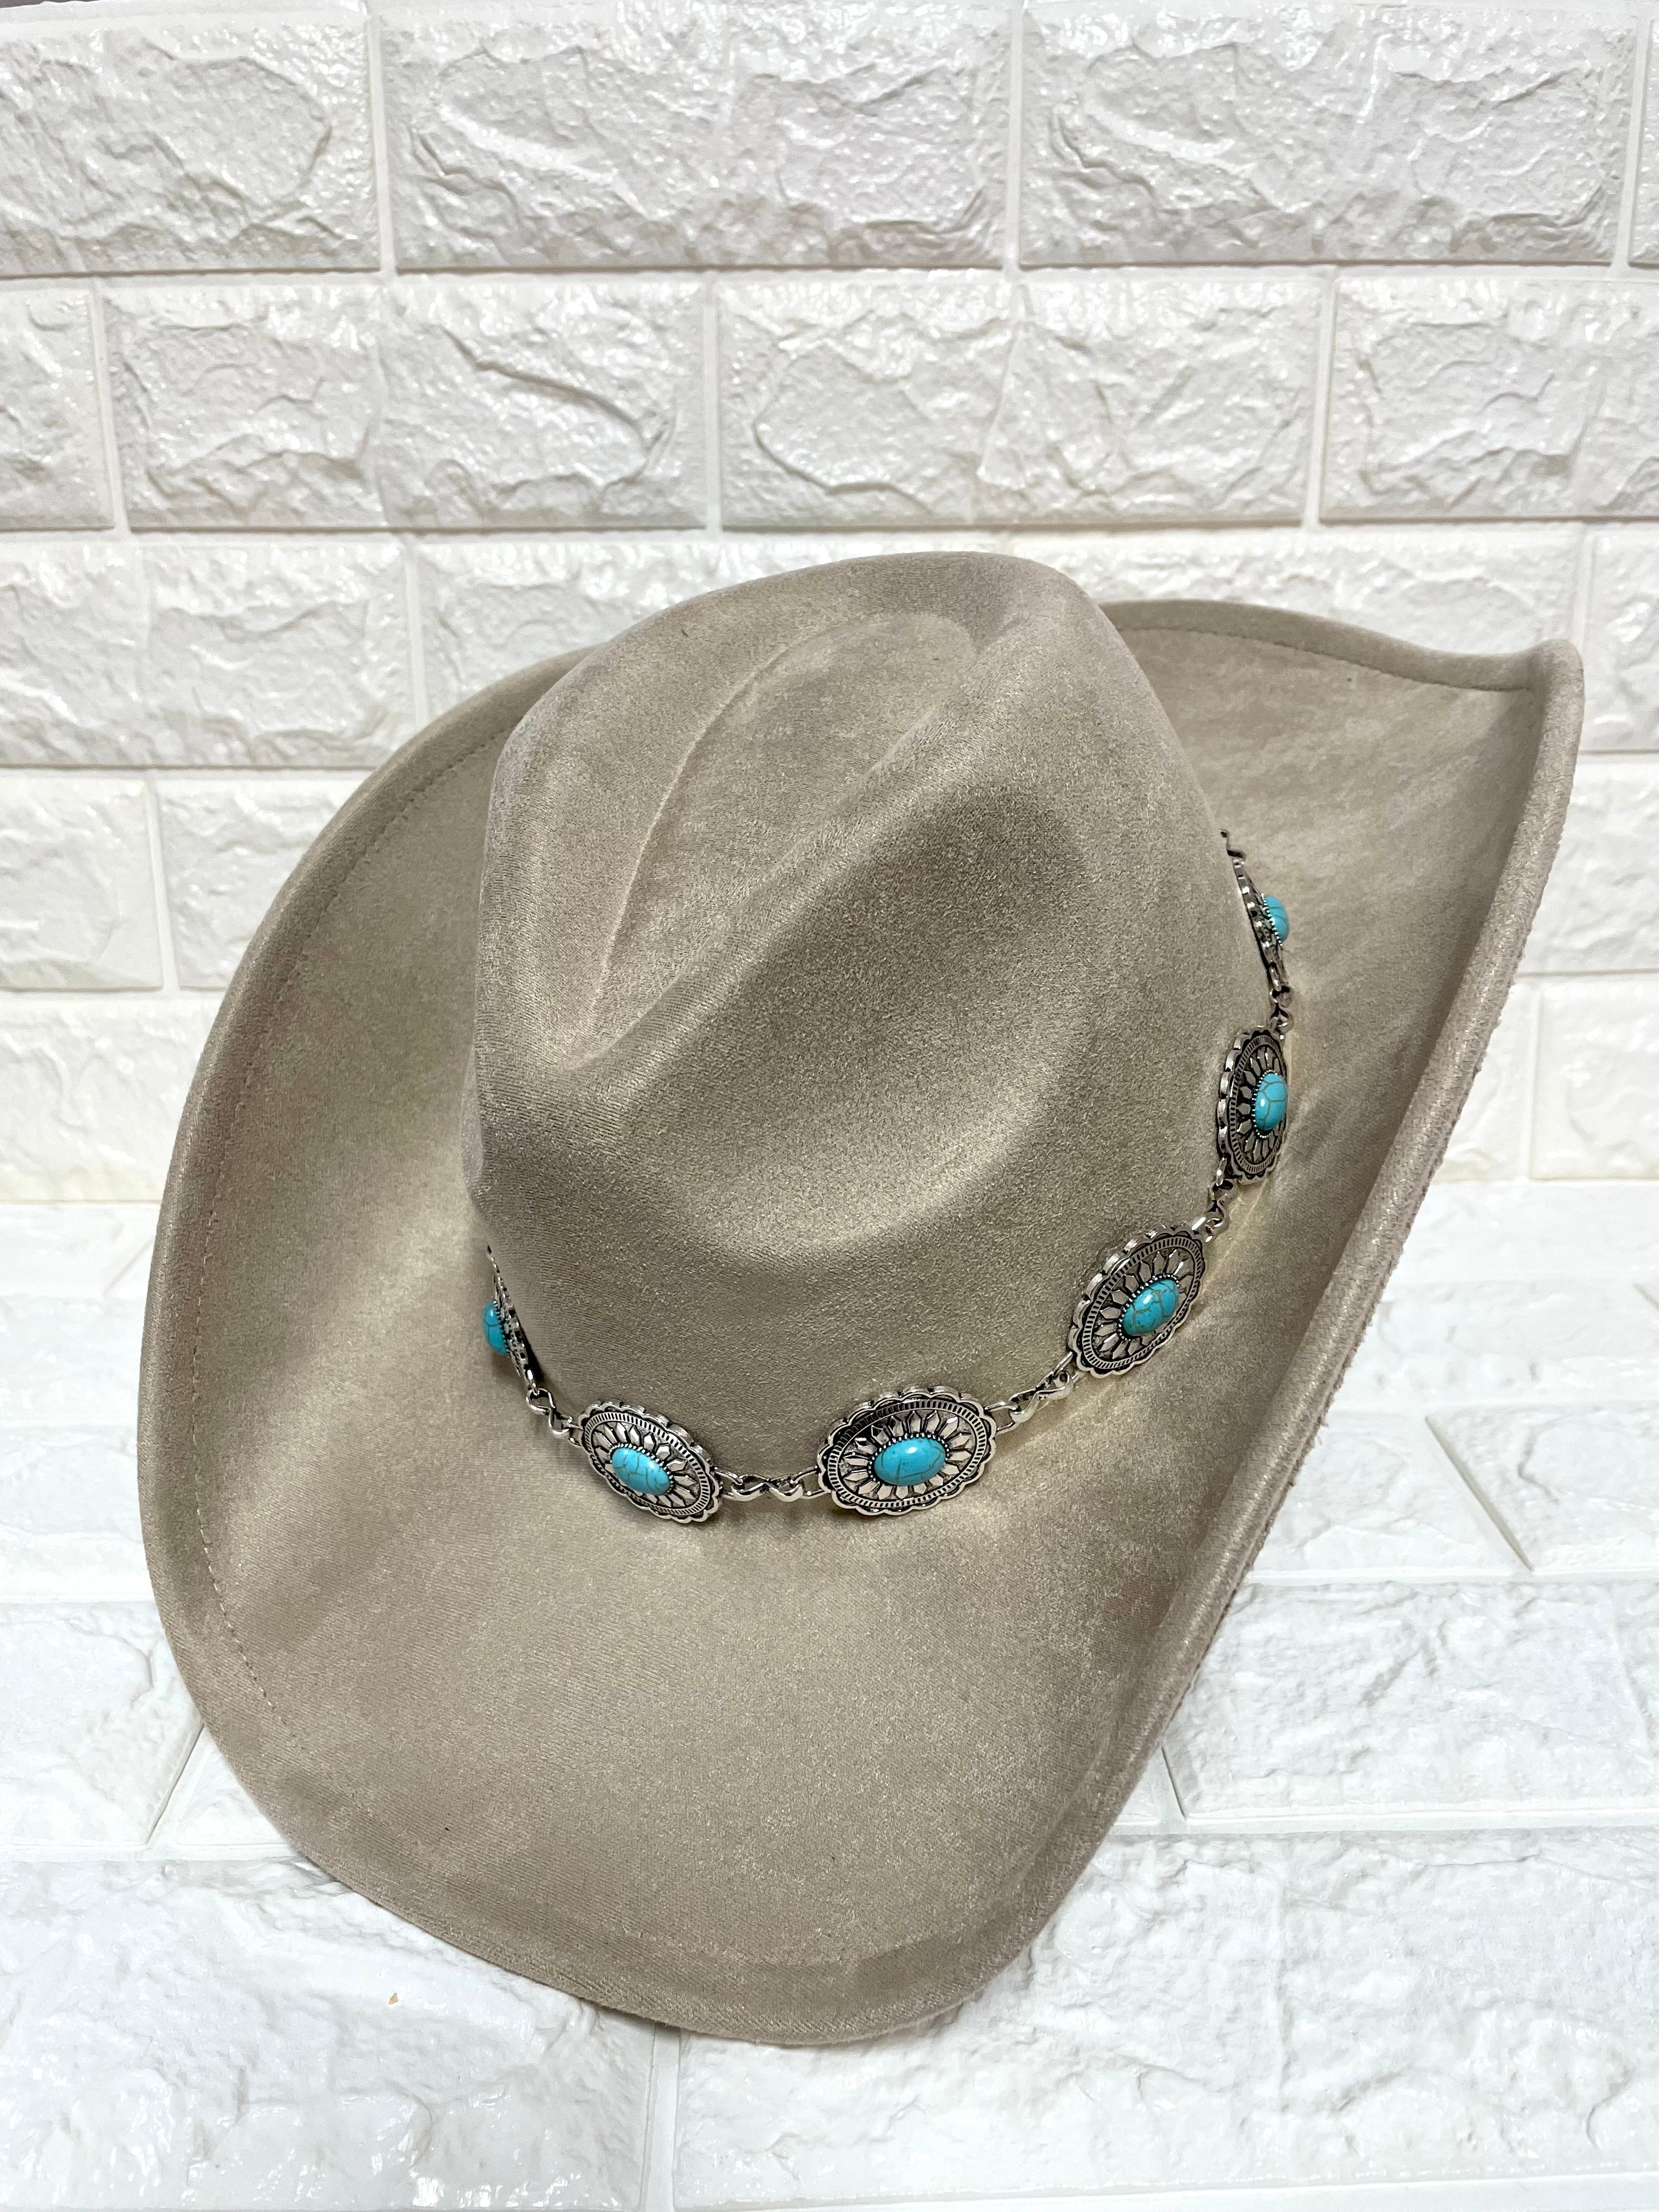 WESTERN HAT WITH TURQUOISE BRIM